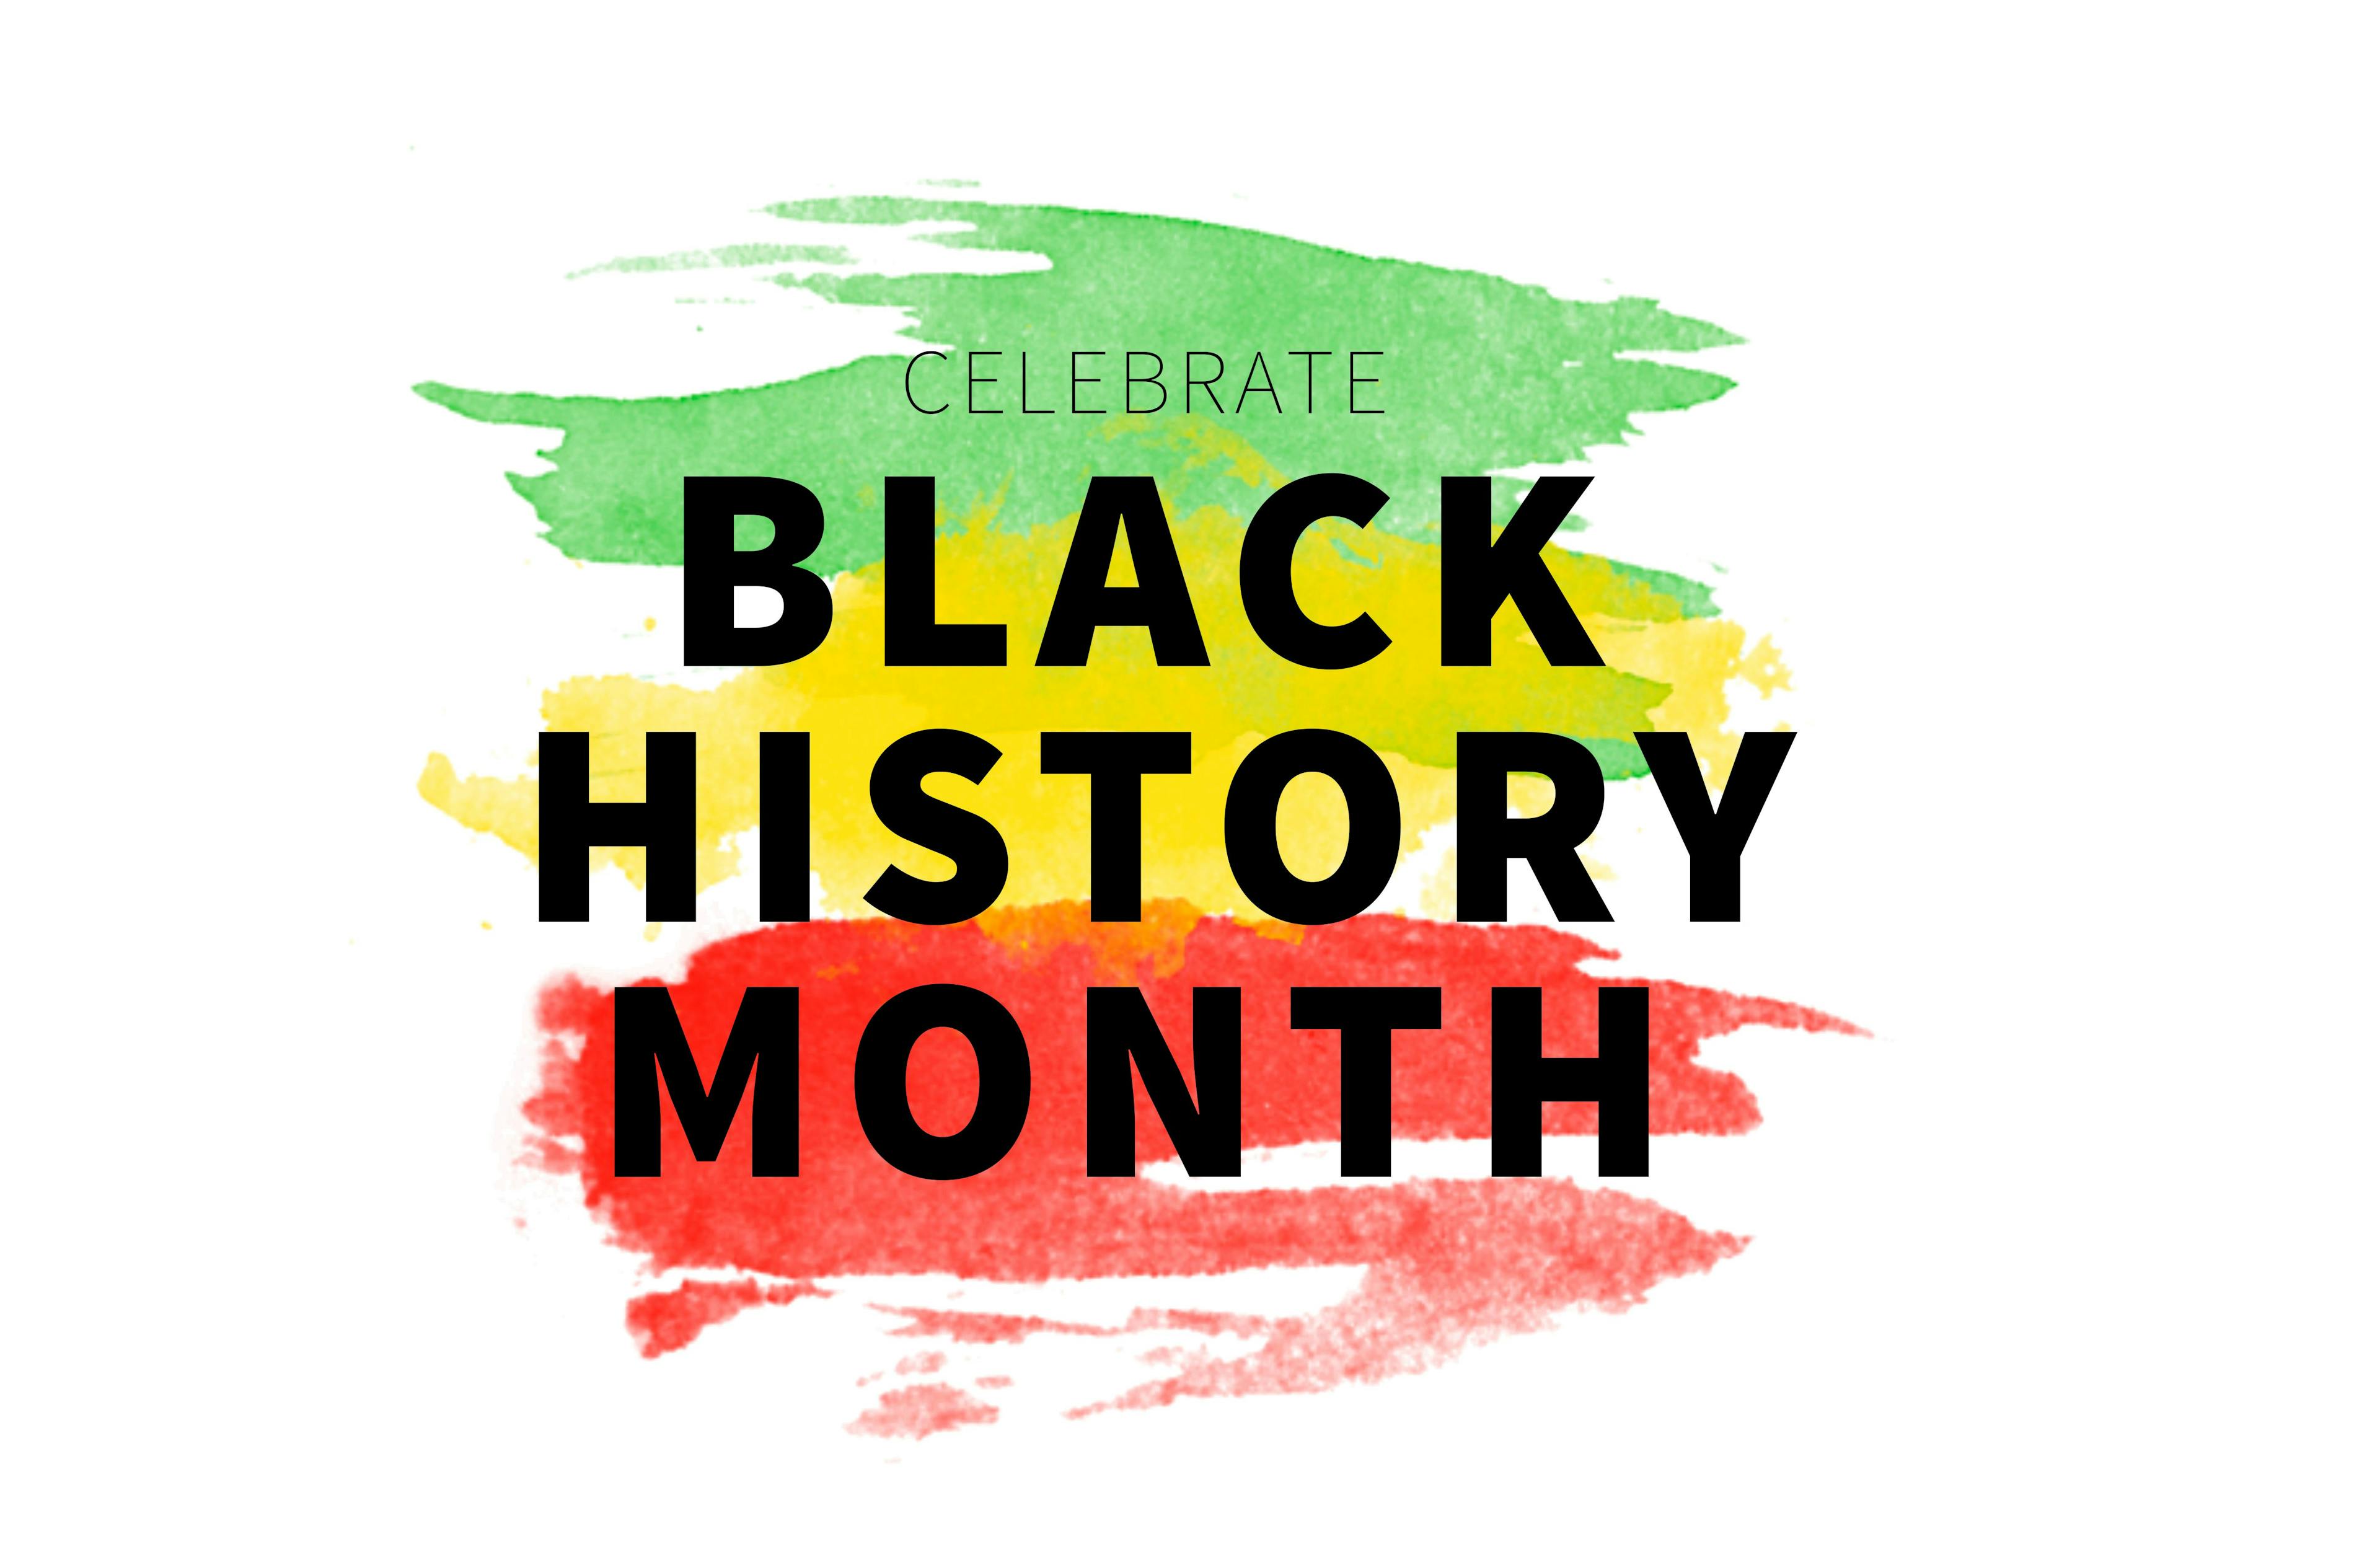 “Maybe Black History Month should be more centered around the contributions of Black Americans—what they have contributed to what this country is. I would love to know more about that.”